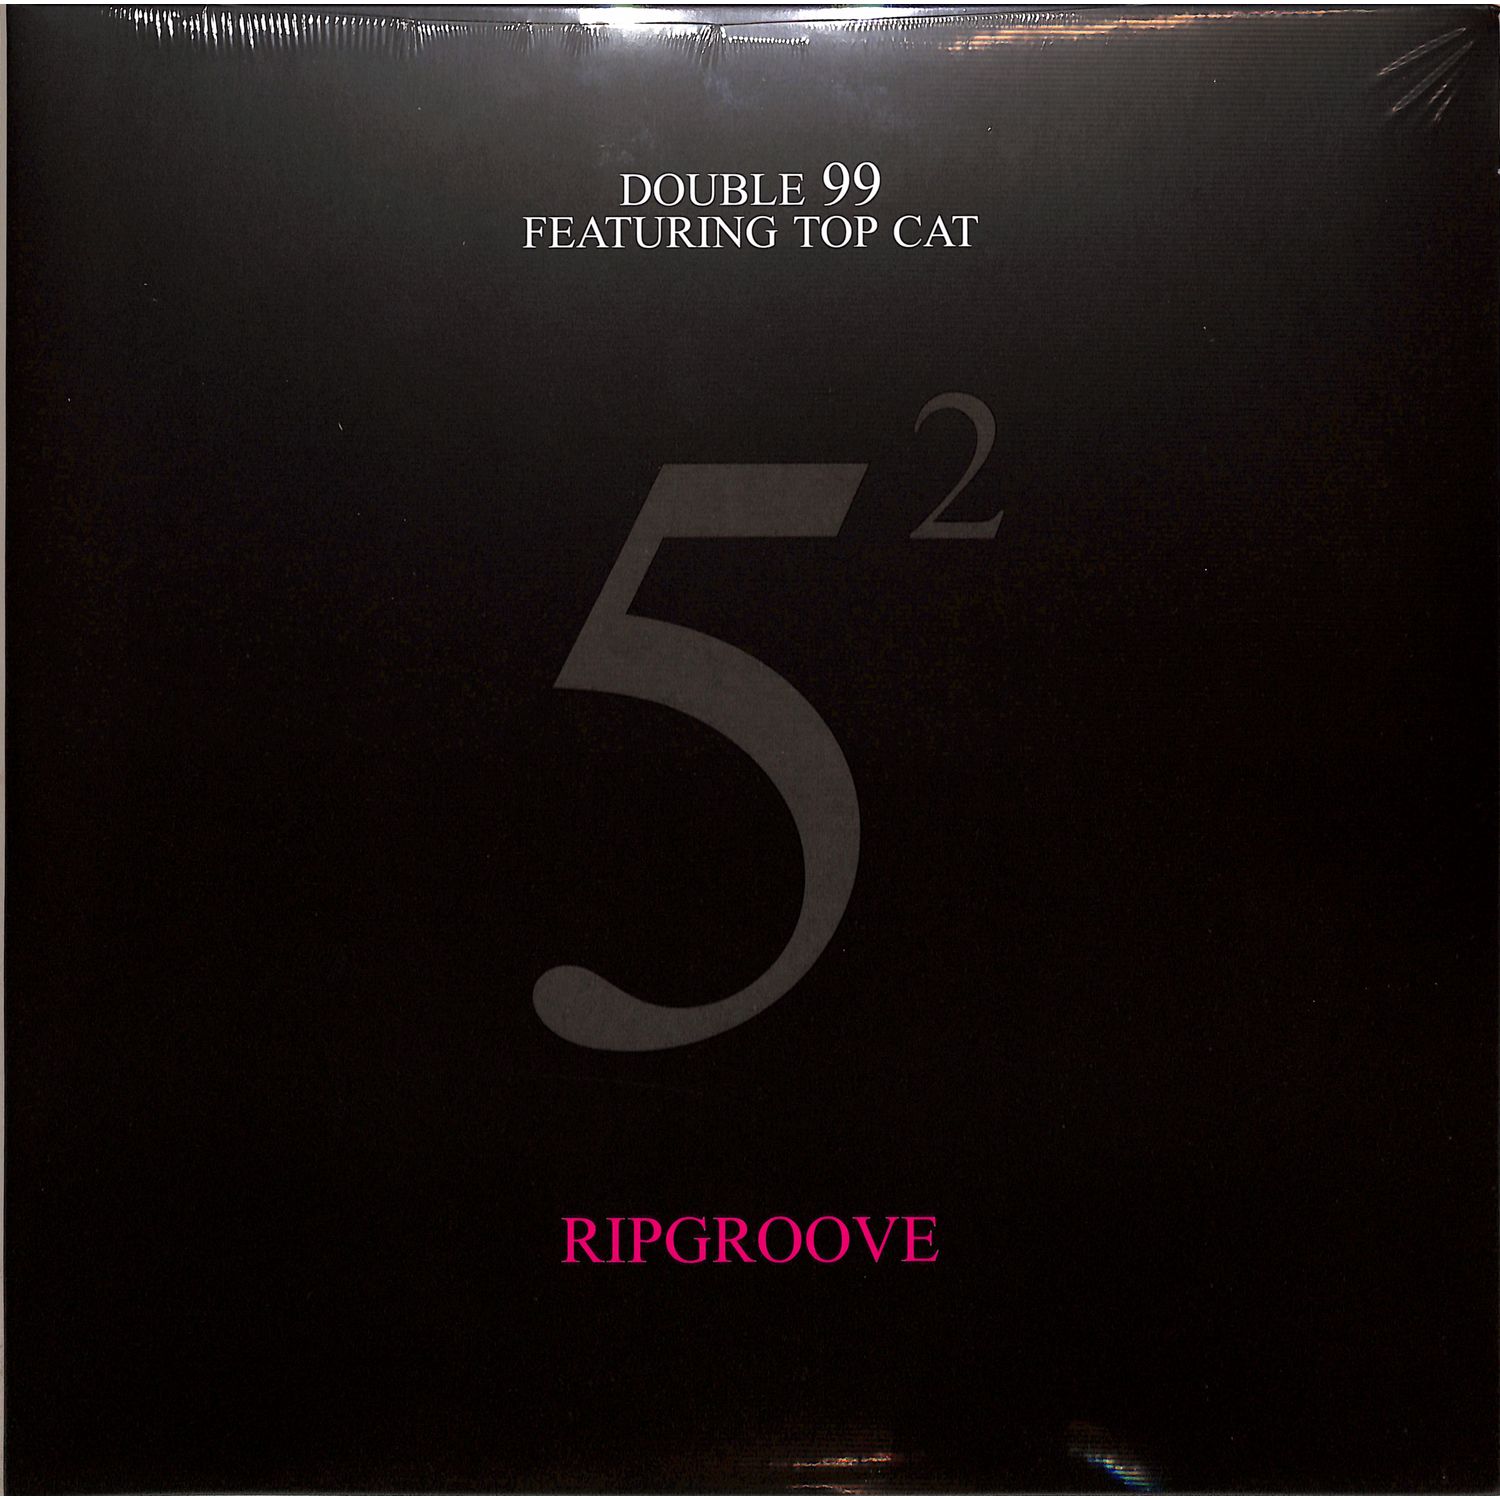 Double 99 Featuring Top Cat - RIPGROOVE 25TH ANNIVERSARY 